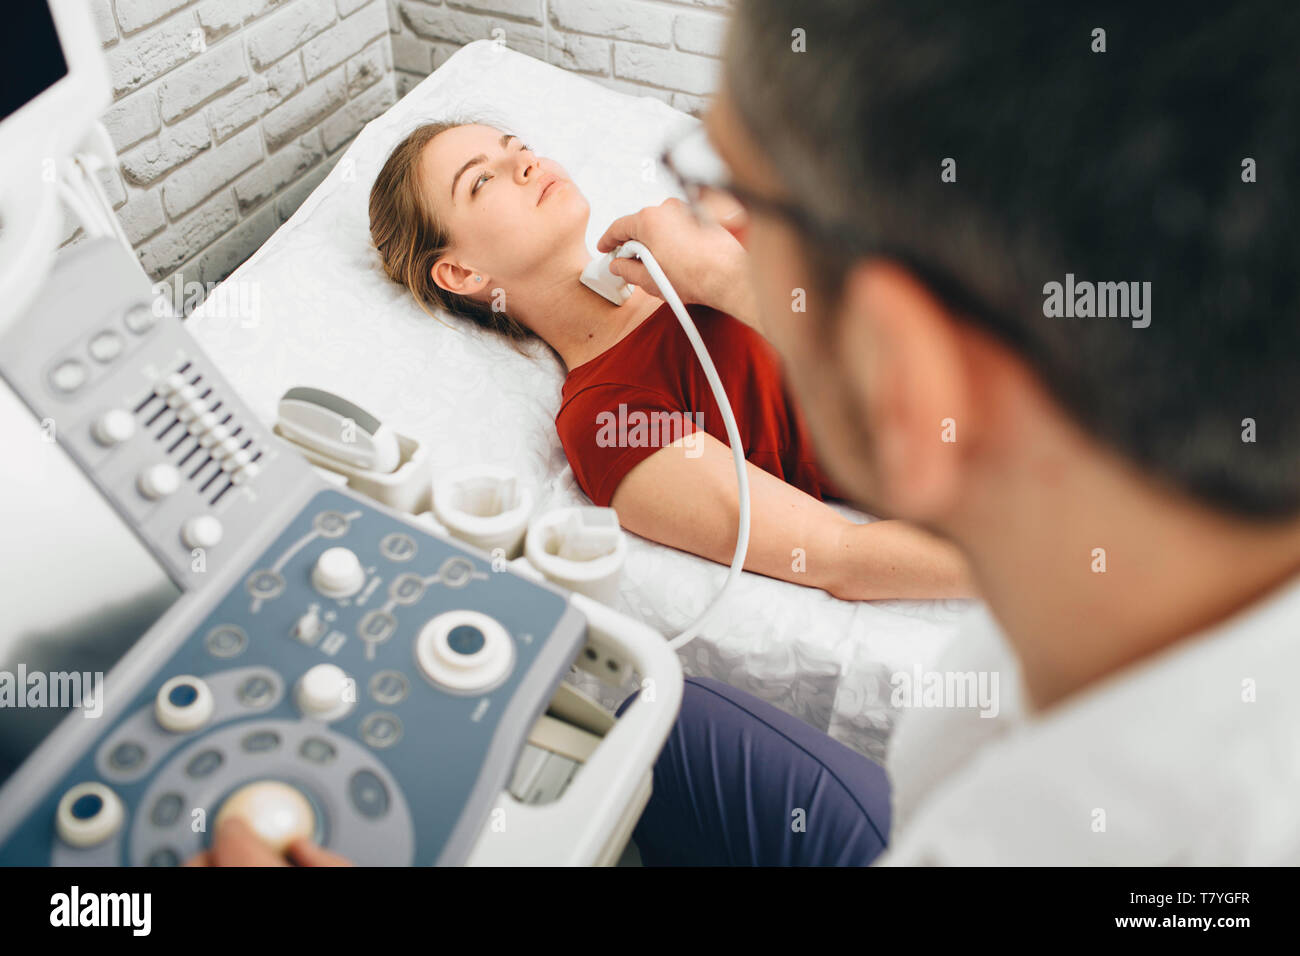 Female patient getting thyroid ultrasound exam in hospital Stock Photo